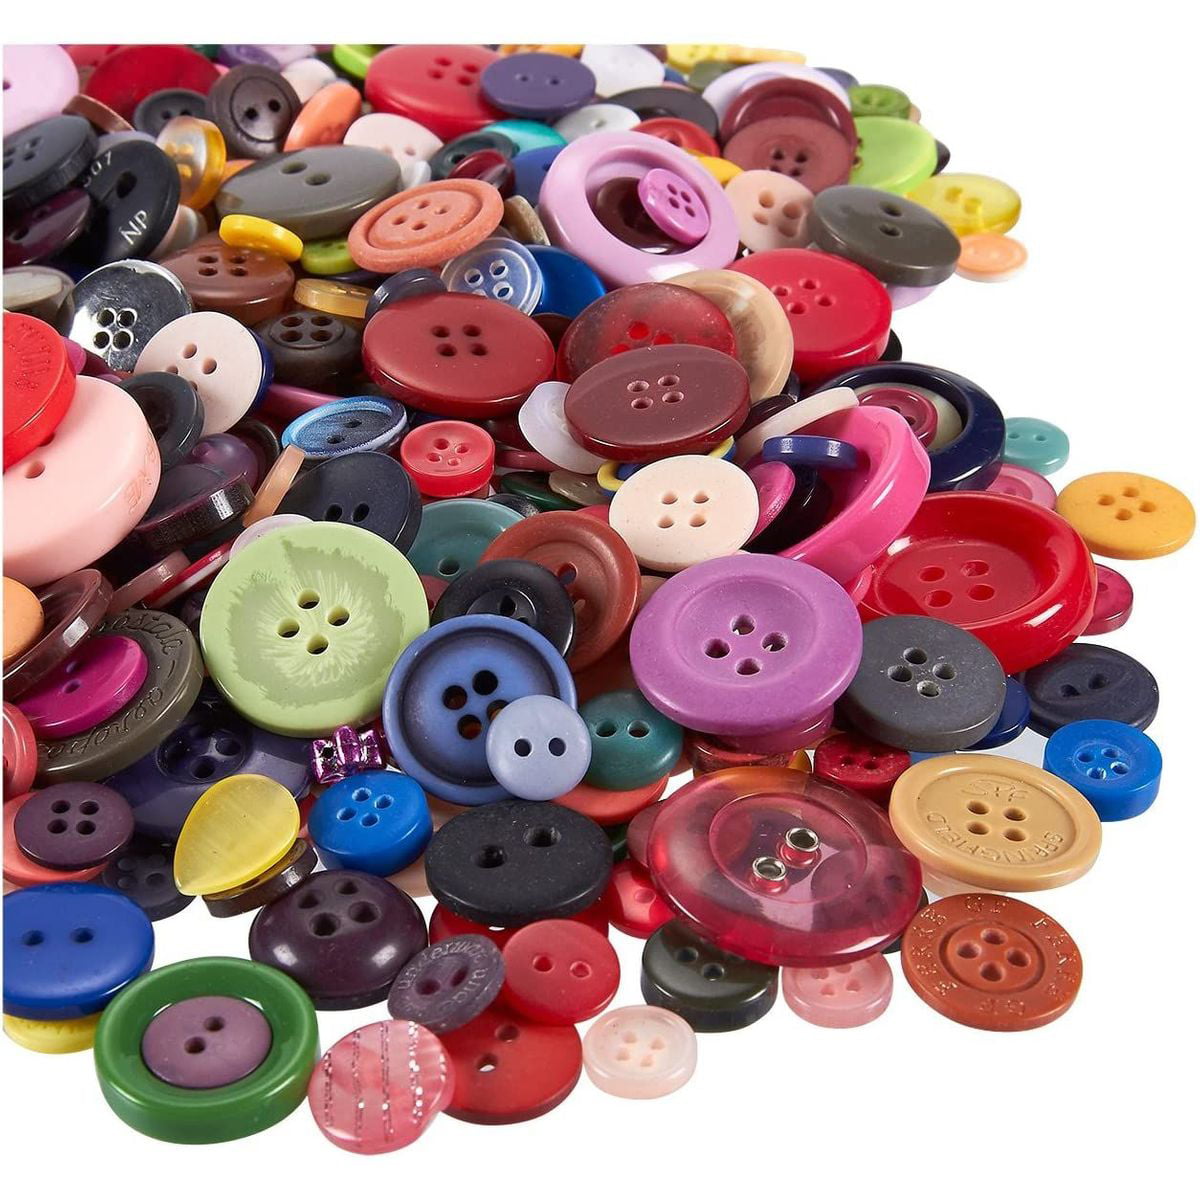 50 assorted novelty 2 and 4 hole flower themed buttons Flowers